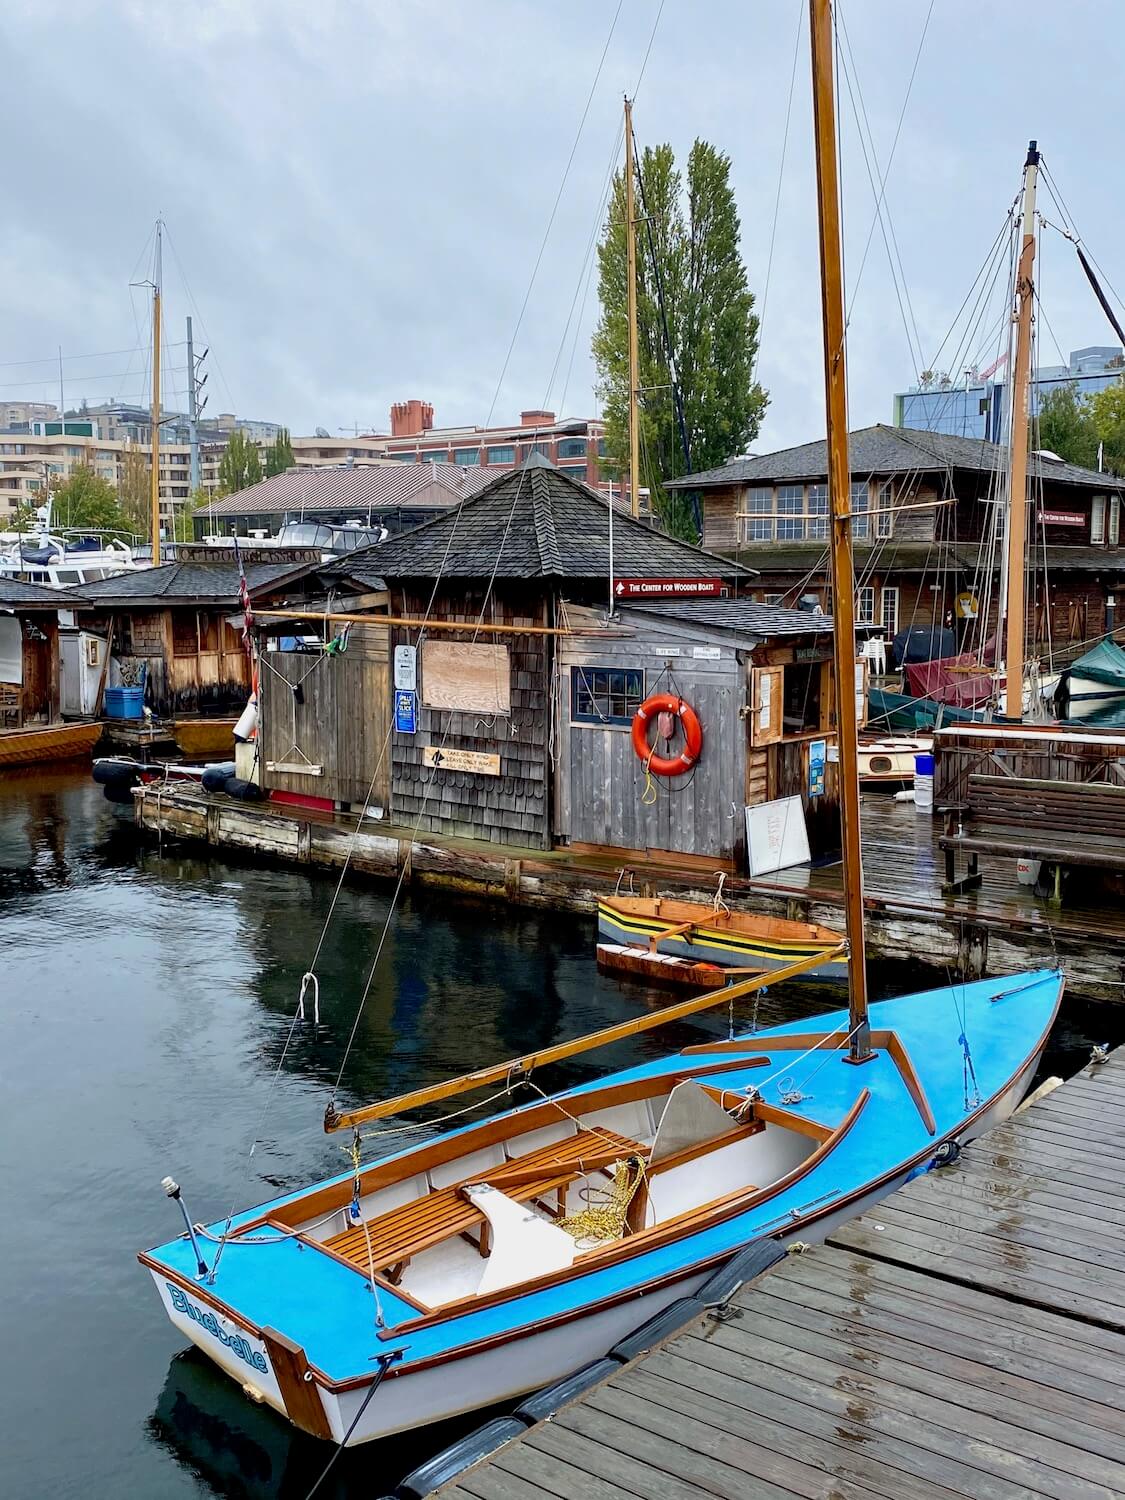 A small blue sailboat is tied to a floating dock, wet and glistening from a recent rain.  In the background are other floating buildings with wood shakes and other marine gear under a blue sky. 